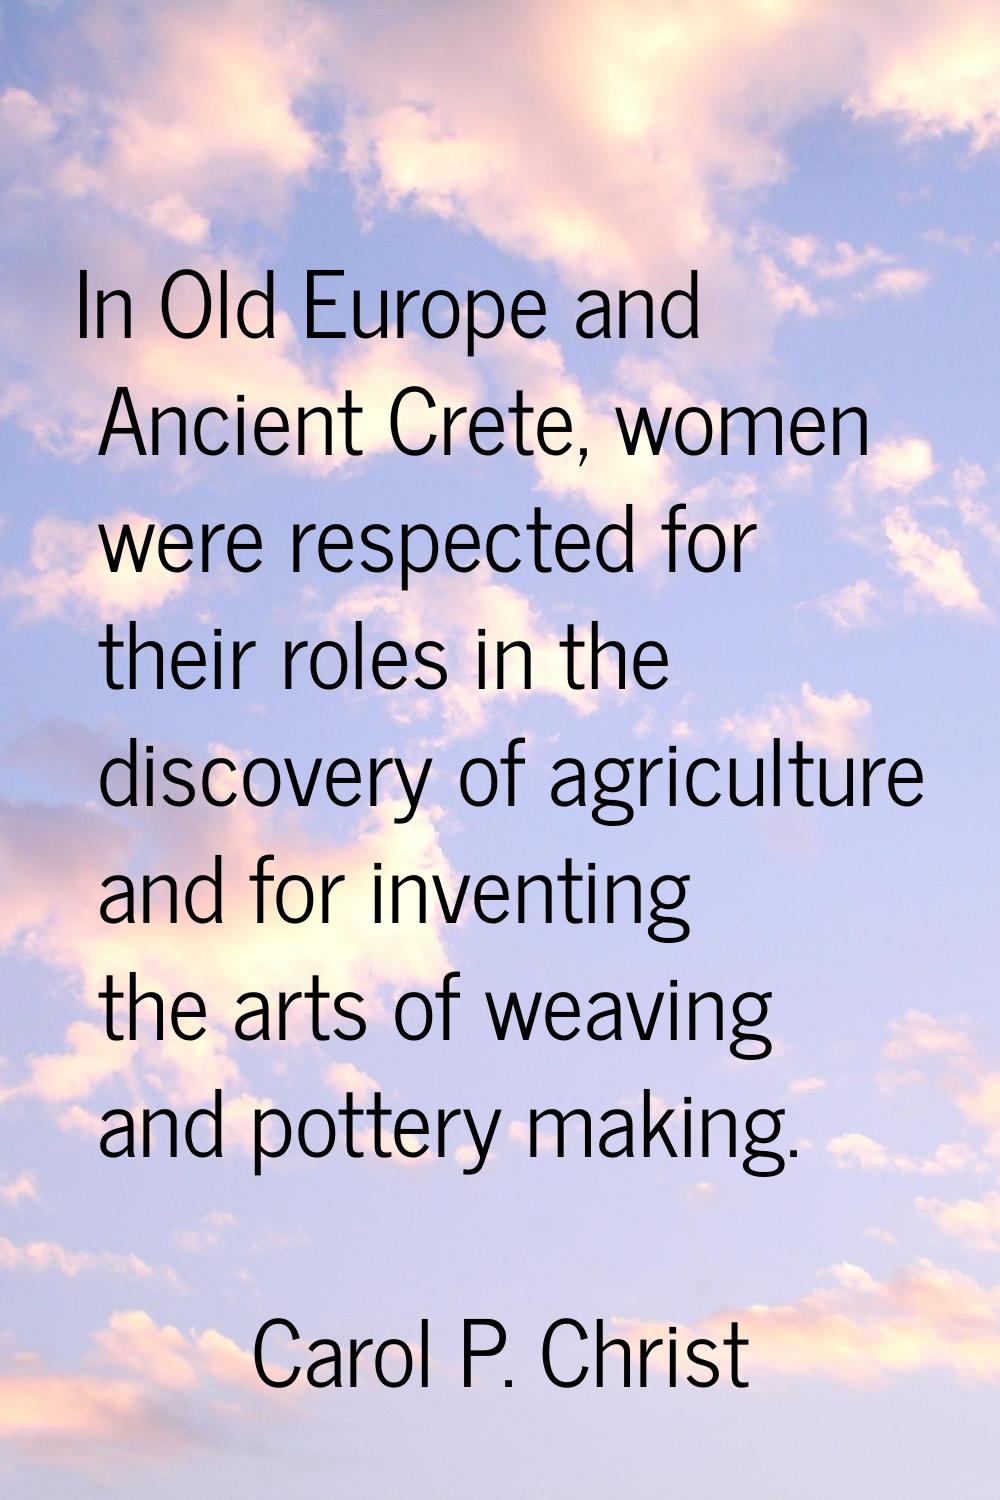 In Old Europe and Ancient Crete, women were respected for their roles in the discovery of agricultu